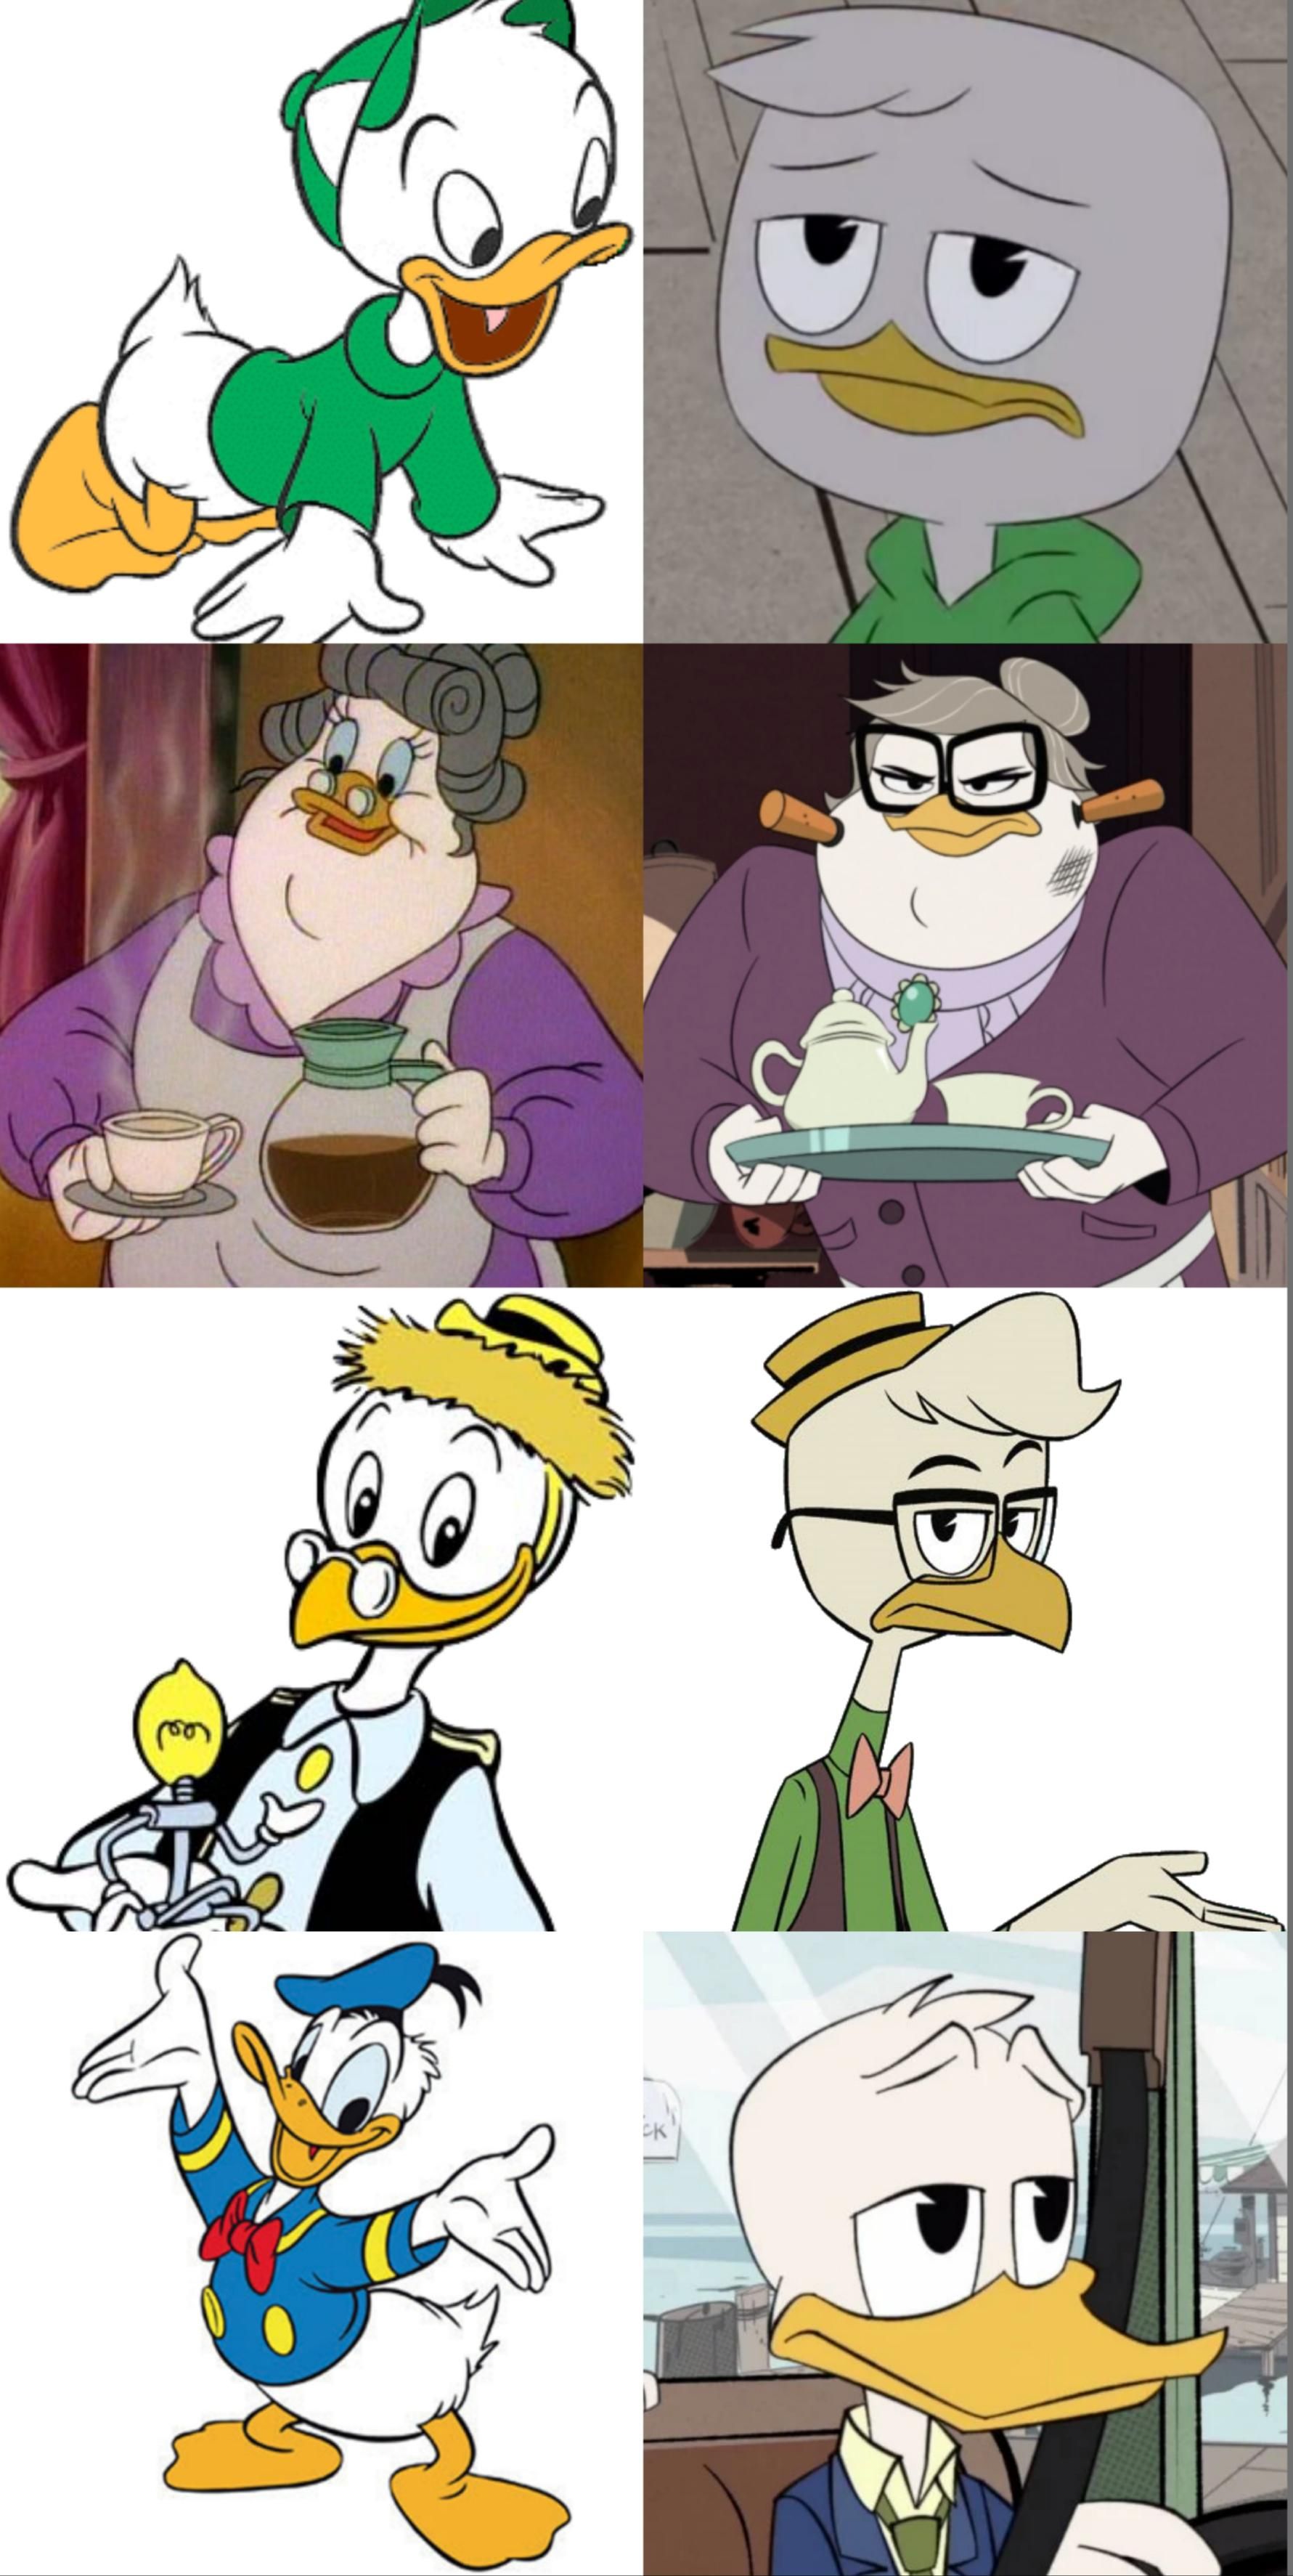 I love how everyone is dead inside in the new Ducktales. Millenials, amiright?